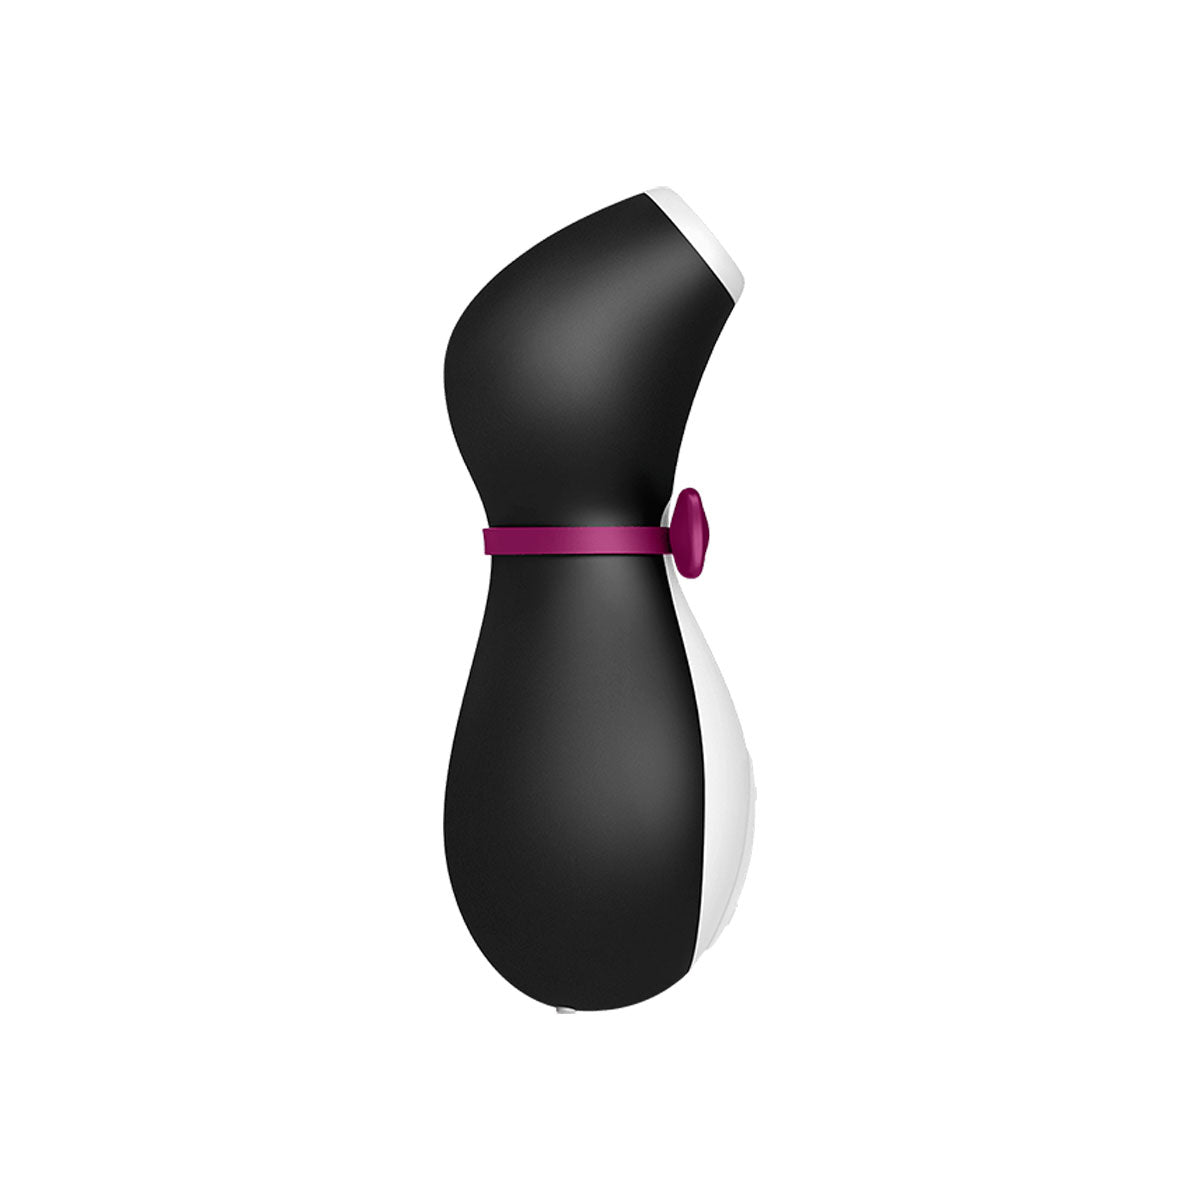 Side view of black and white penguin shaped air clitoral stimulator with red bow tie Nudie Co